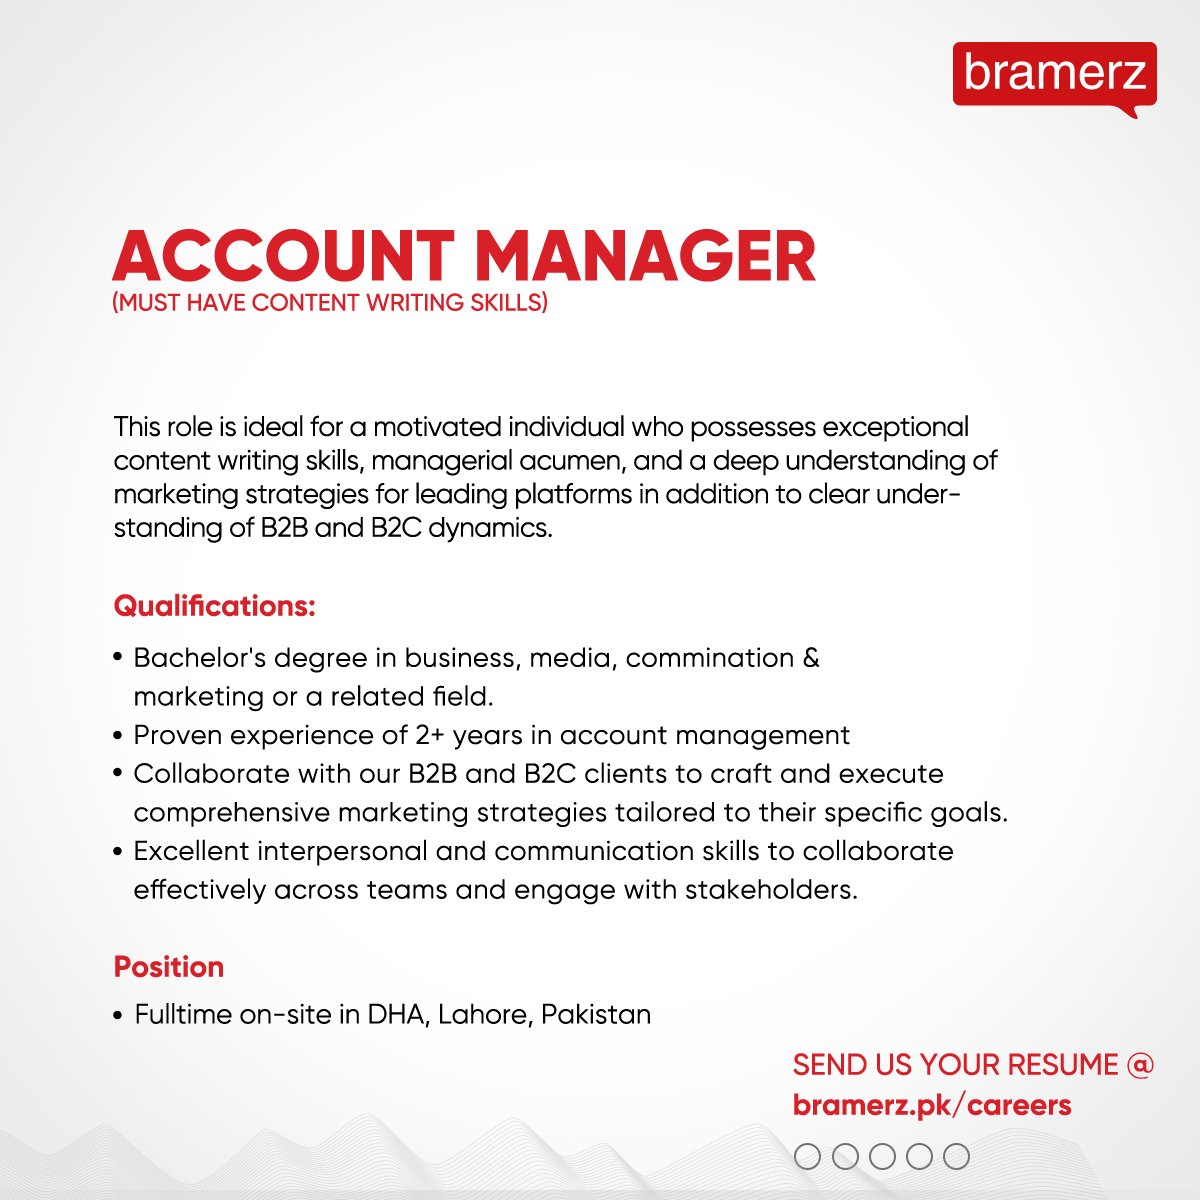 We have openings for the following roles:
• Creative Manager 
• Account Manager
• Visualizer & 2D Animator
Interested candidates can share their resumes & and portfolios at bramerz.com/careers/
@badar76
#Bramerz #hiringnow #hiringalerts #jobsinlahore #Pakistan #Jobs